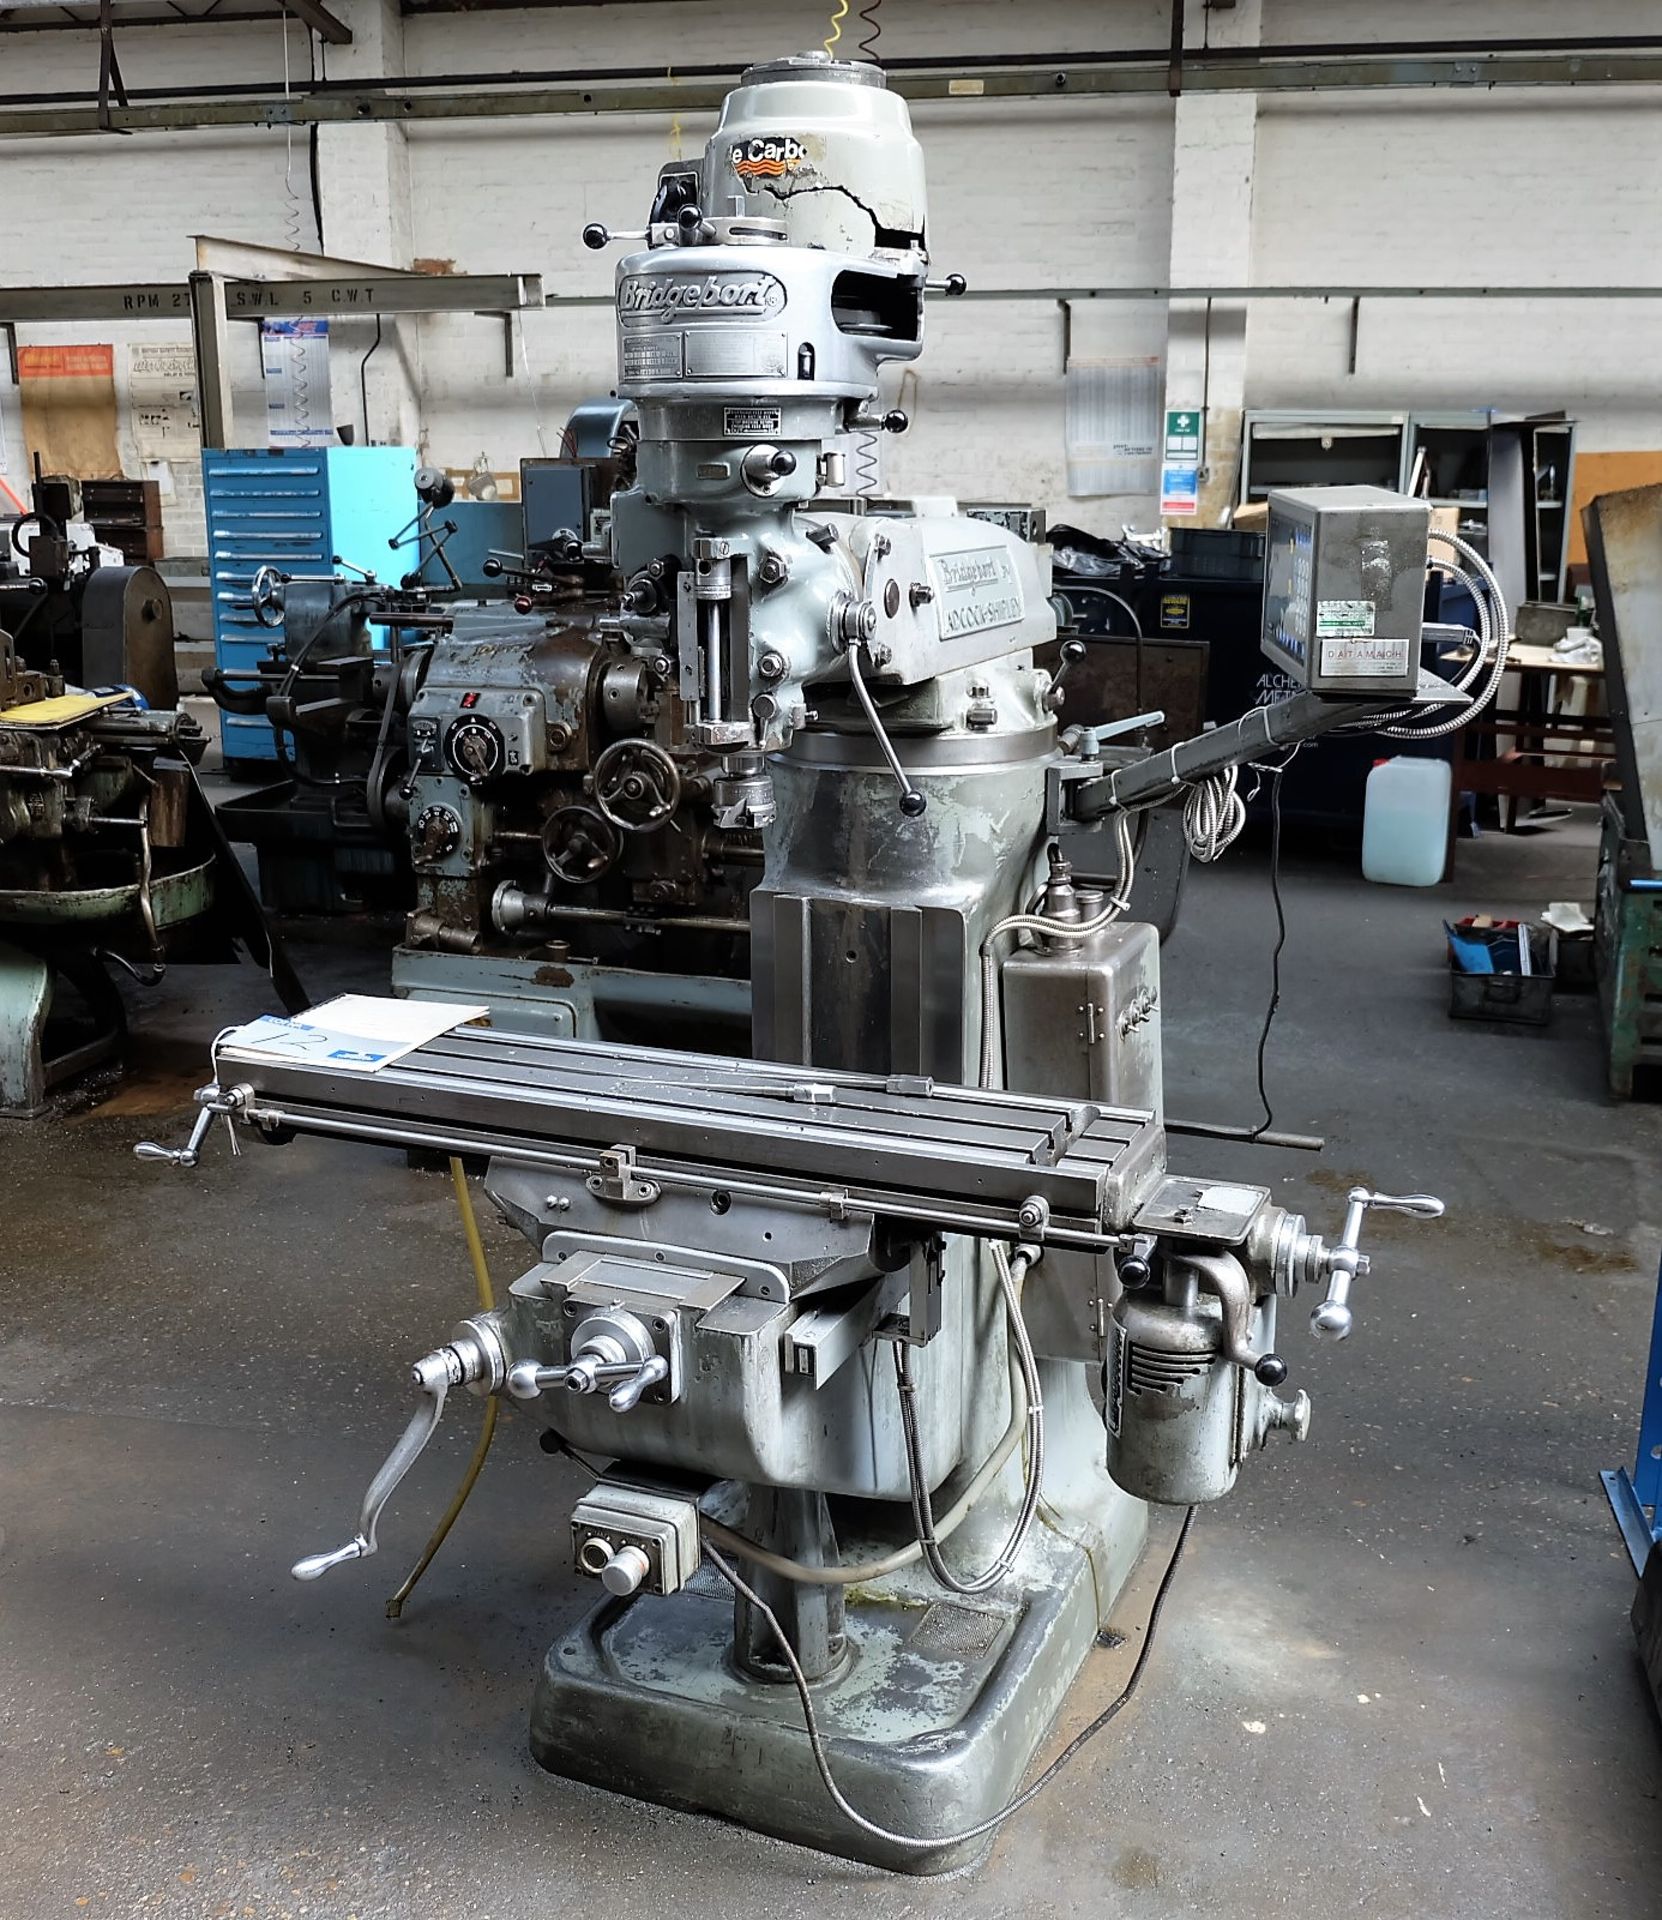 A Bridgeport BRJ Vertical Turret Head Milling Machine, 42in x 9in table with Mitutoyo 2 axis Digital - Image 2 of 5